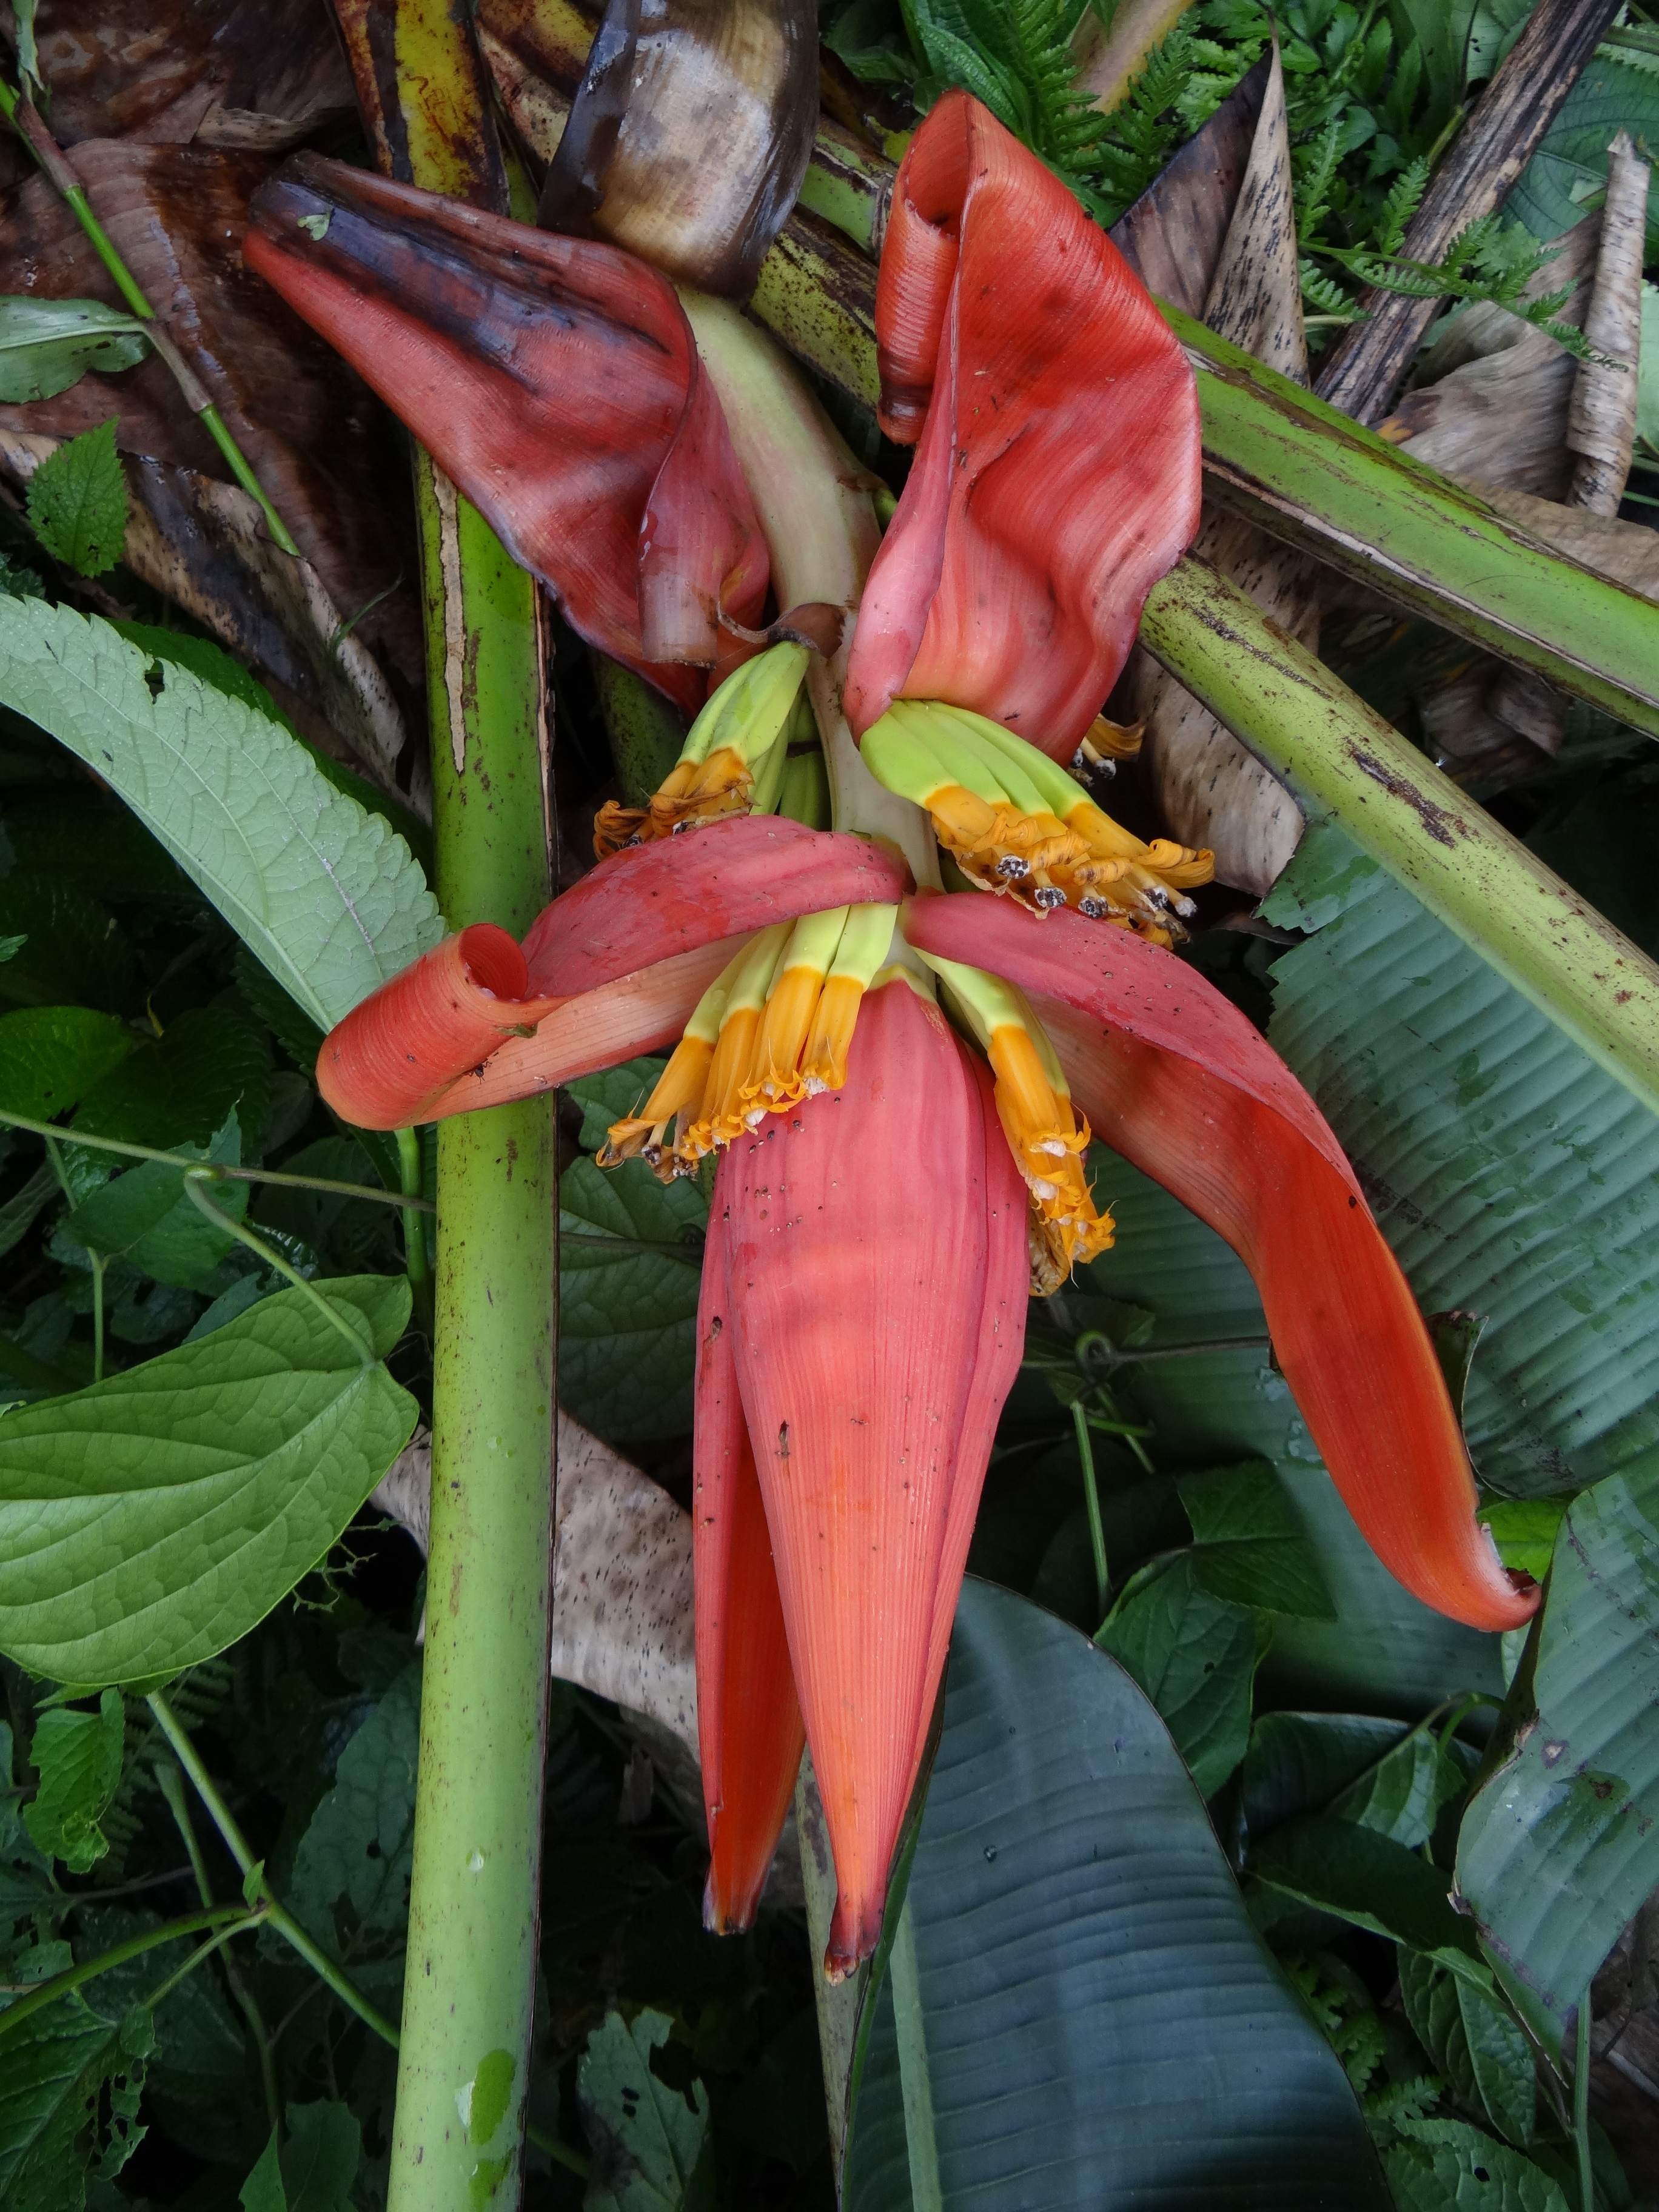 The Musa Markkui is a new species of wild banana discovered in India, now home to 23 different species of banana.